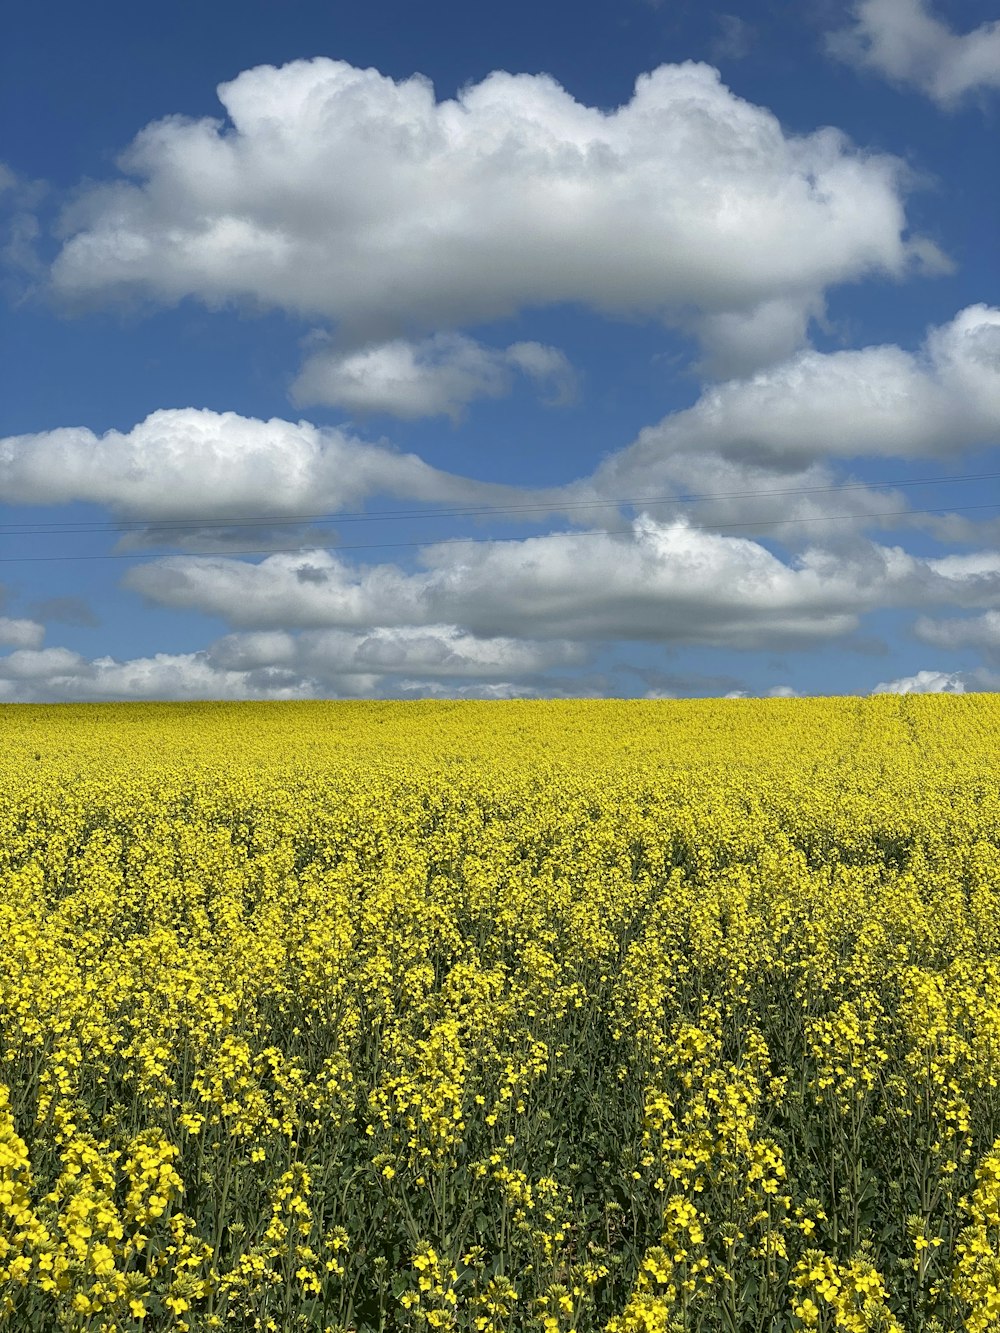 yellow flower field under white clouds and blue sky during daytime